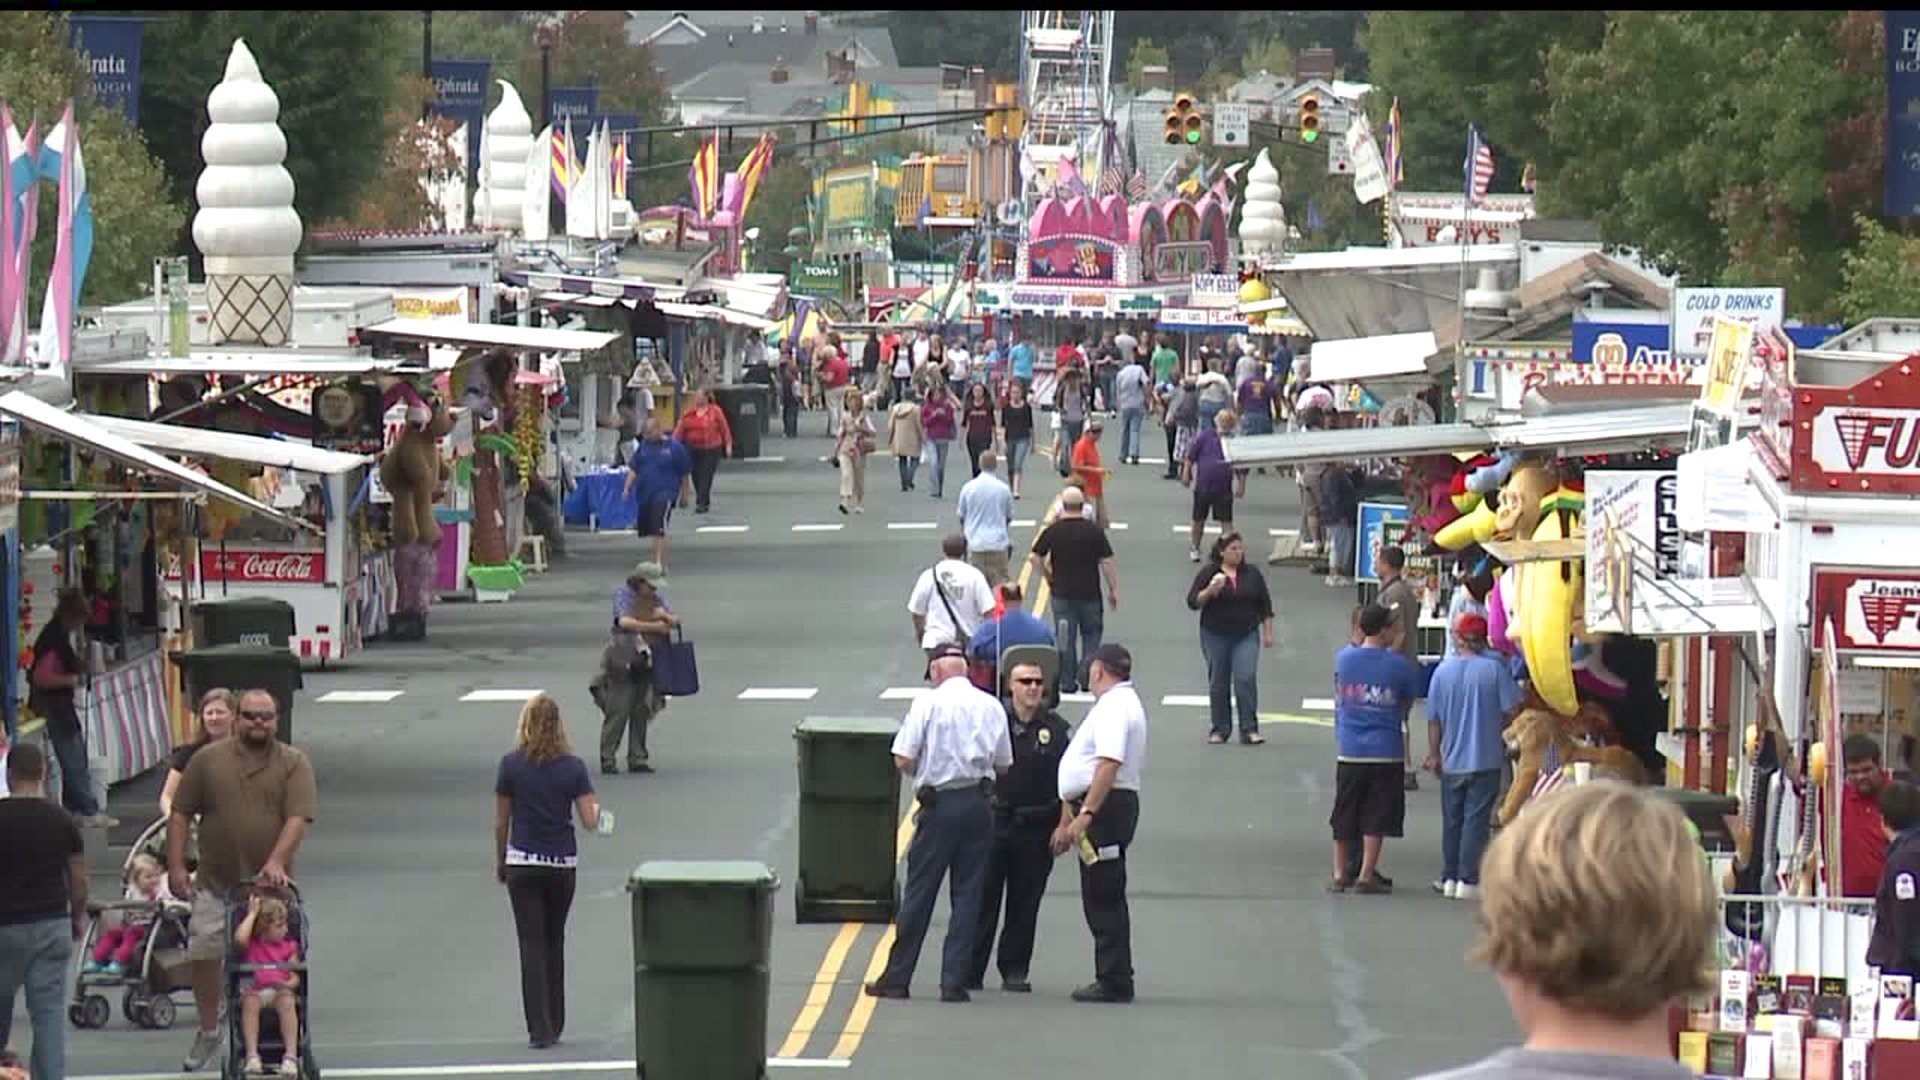 Wednesday’s parade at the Ephrata Fair canceled due to unfavorable